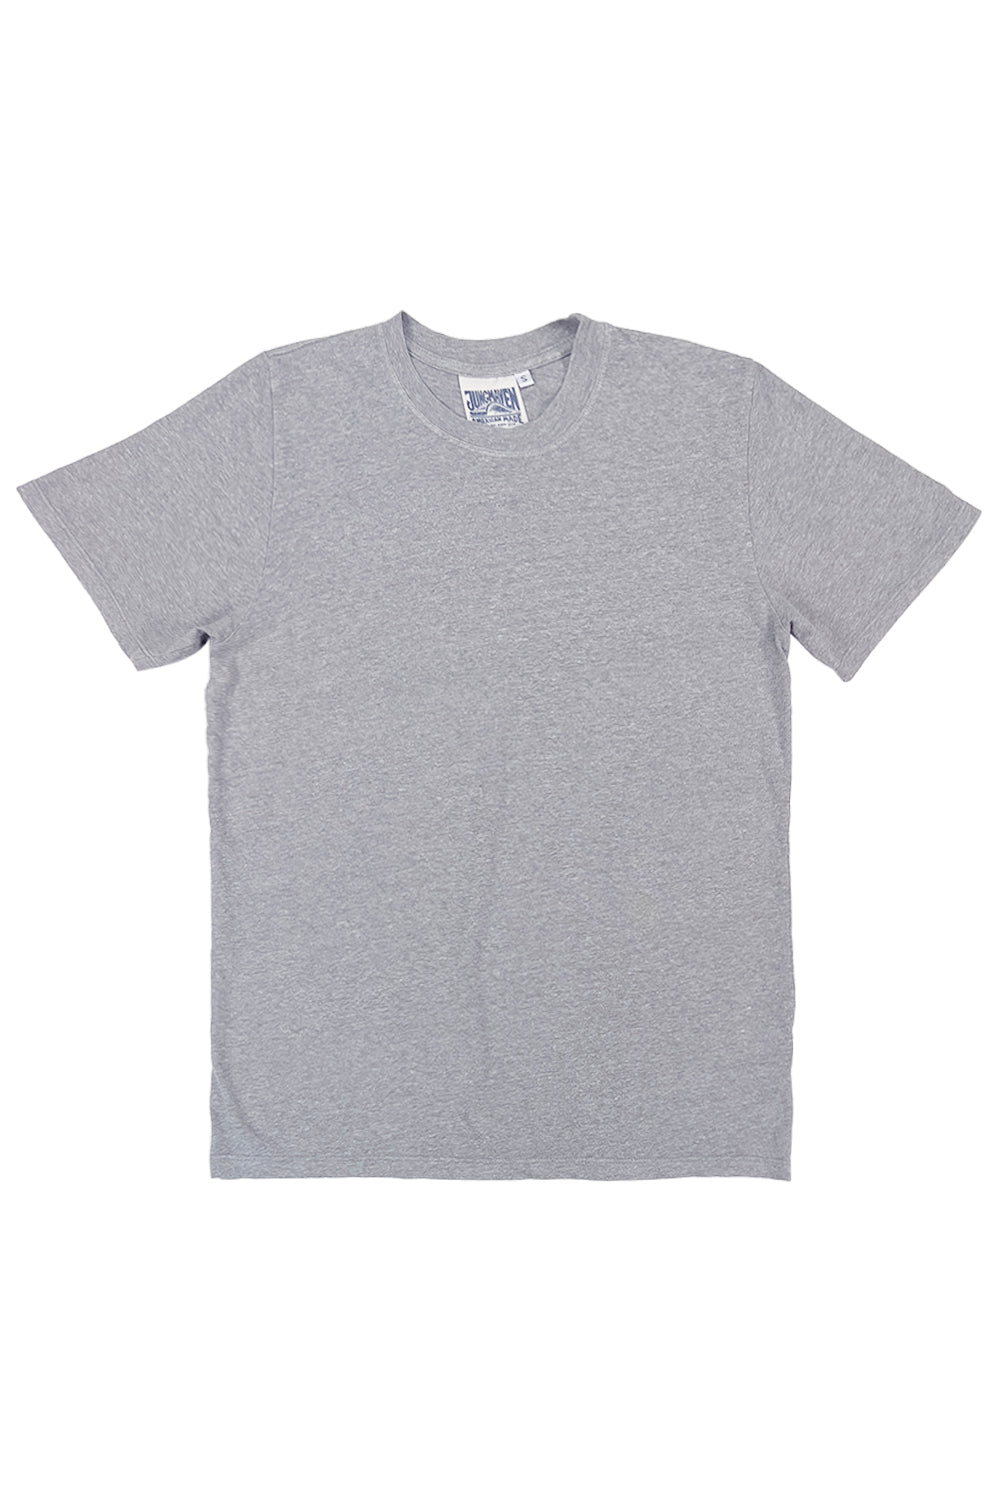  Heathered Jung Tee | Jungmaven Hemp Clothing & Accessories / Color: Athletic Gray